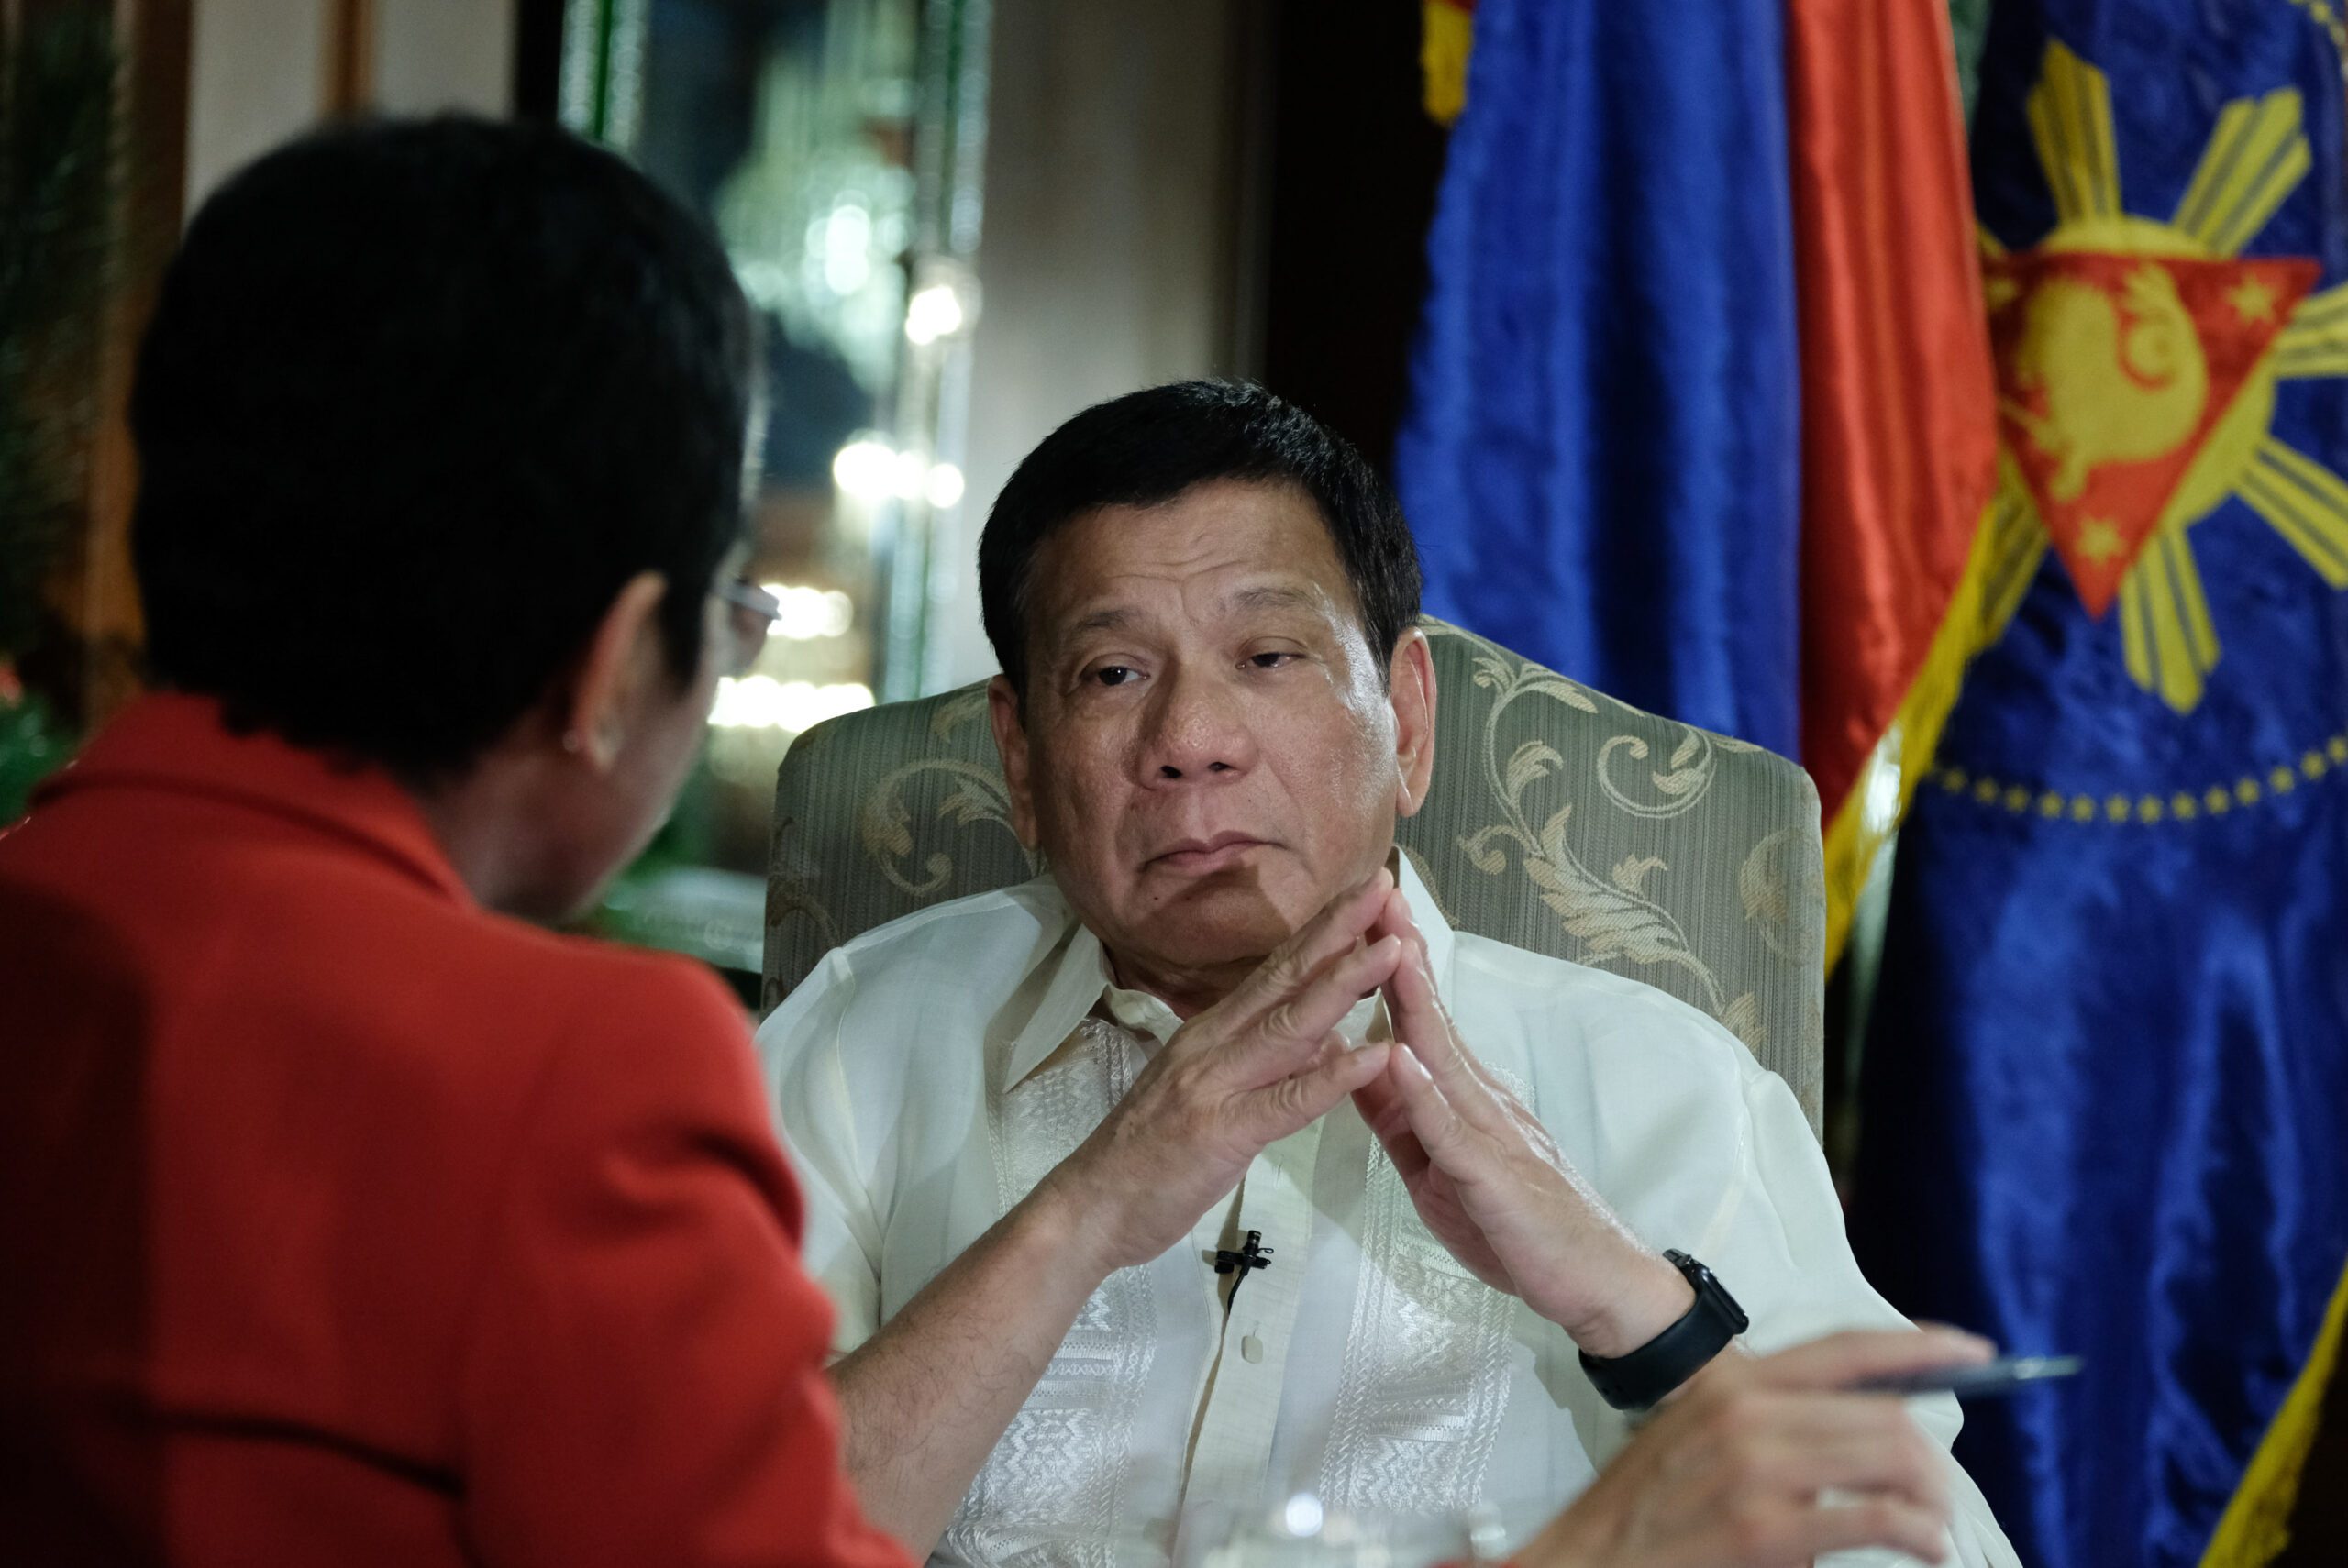 Duterte alluding to Maria Ressa Time cover? ‘Inyo na ‘yan’